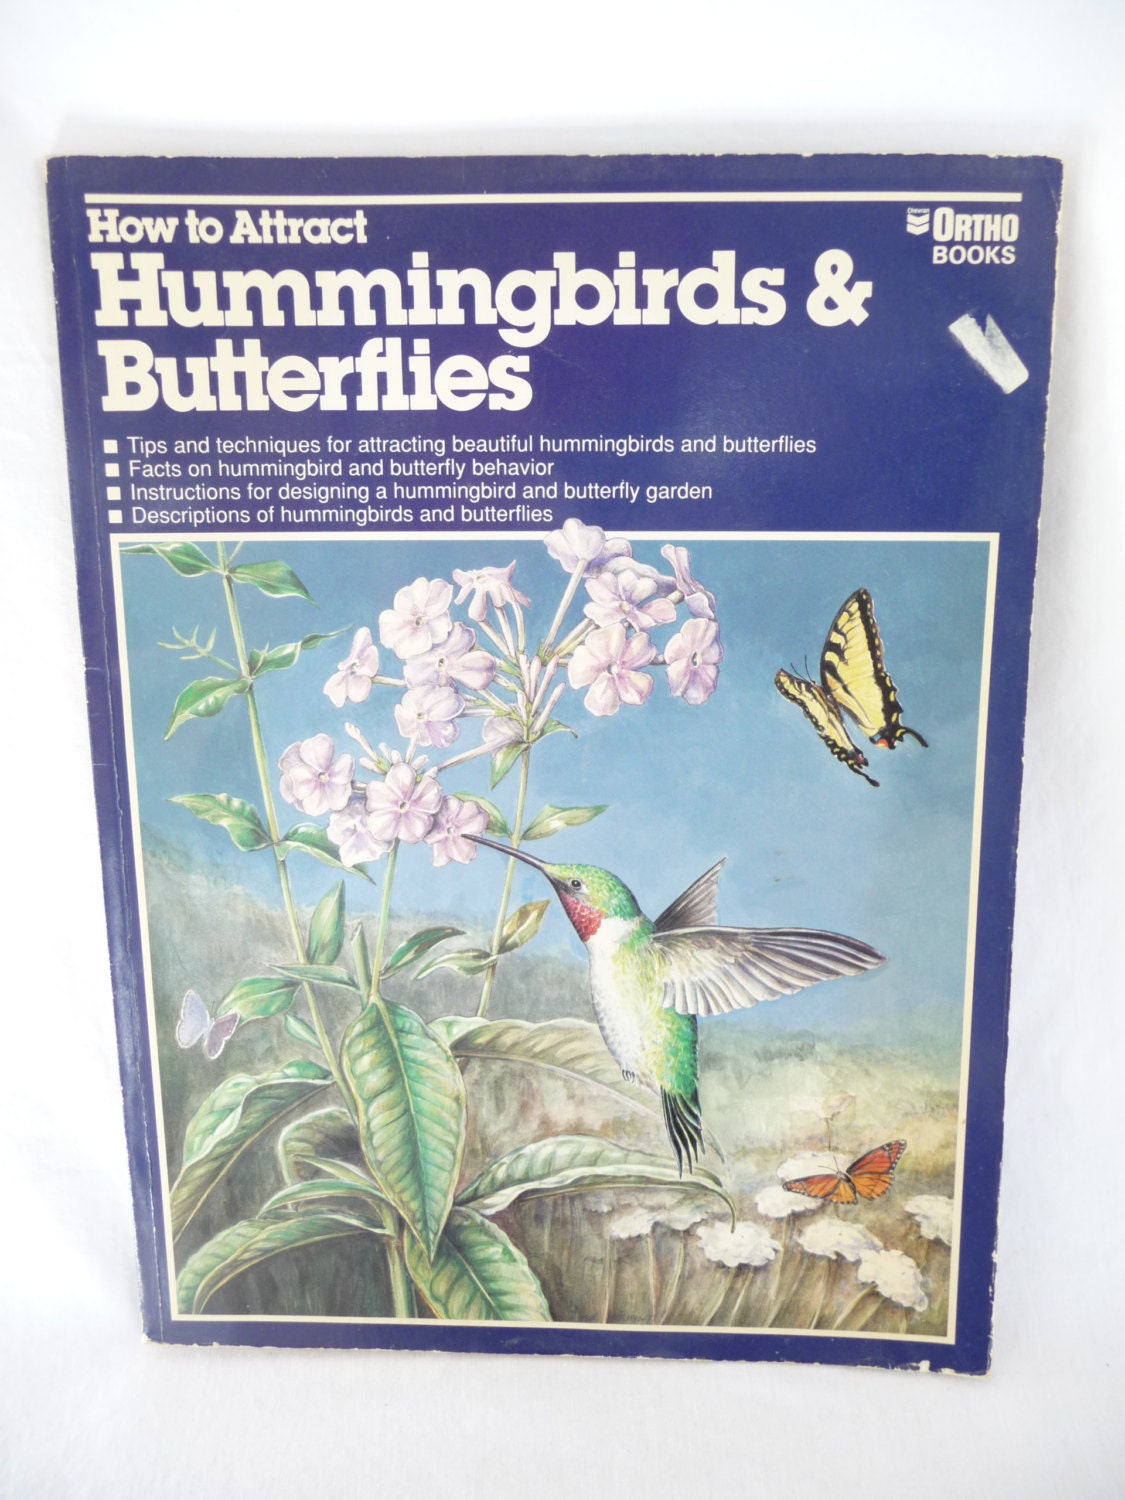 How To Attract Hummingbirds Butterflies Vintage Ortho Book